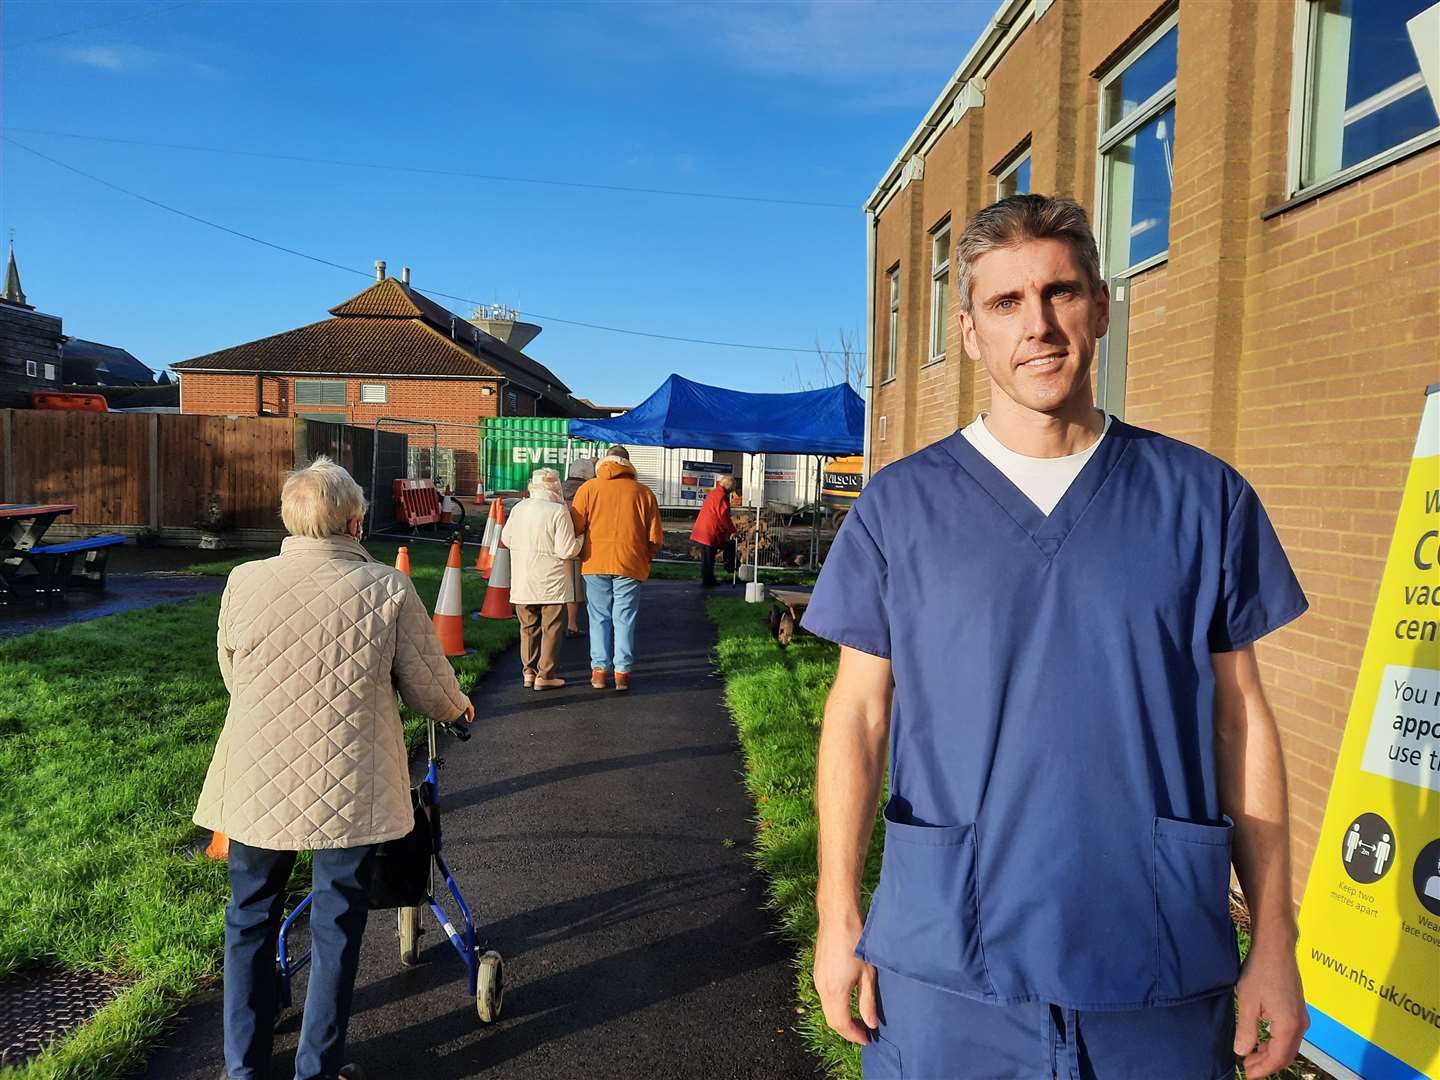 Dr Jeremy Carter stood next to a queue of people waiting for the first batch of vaccines earlier this month